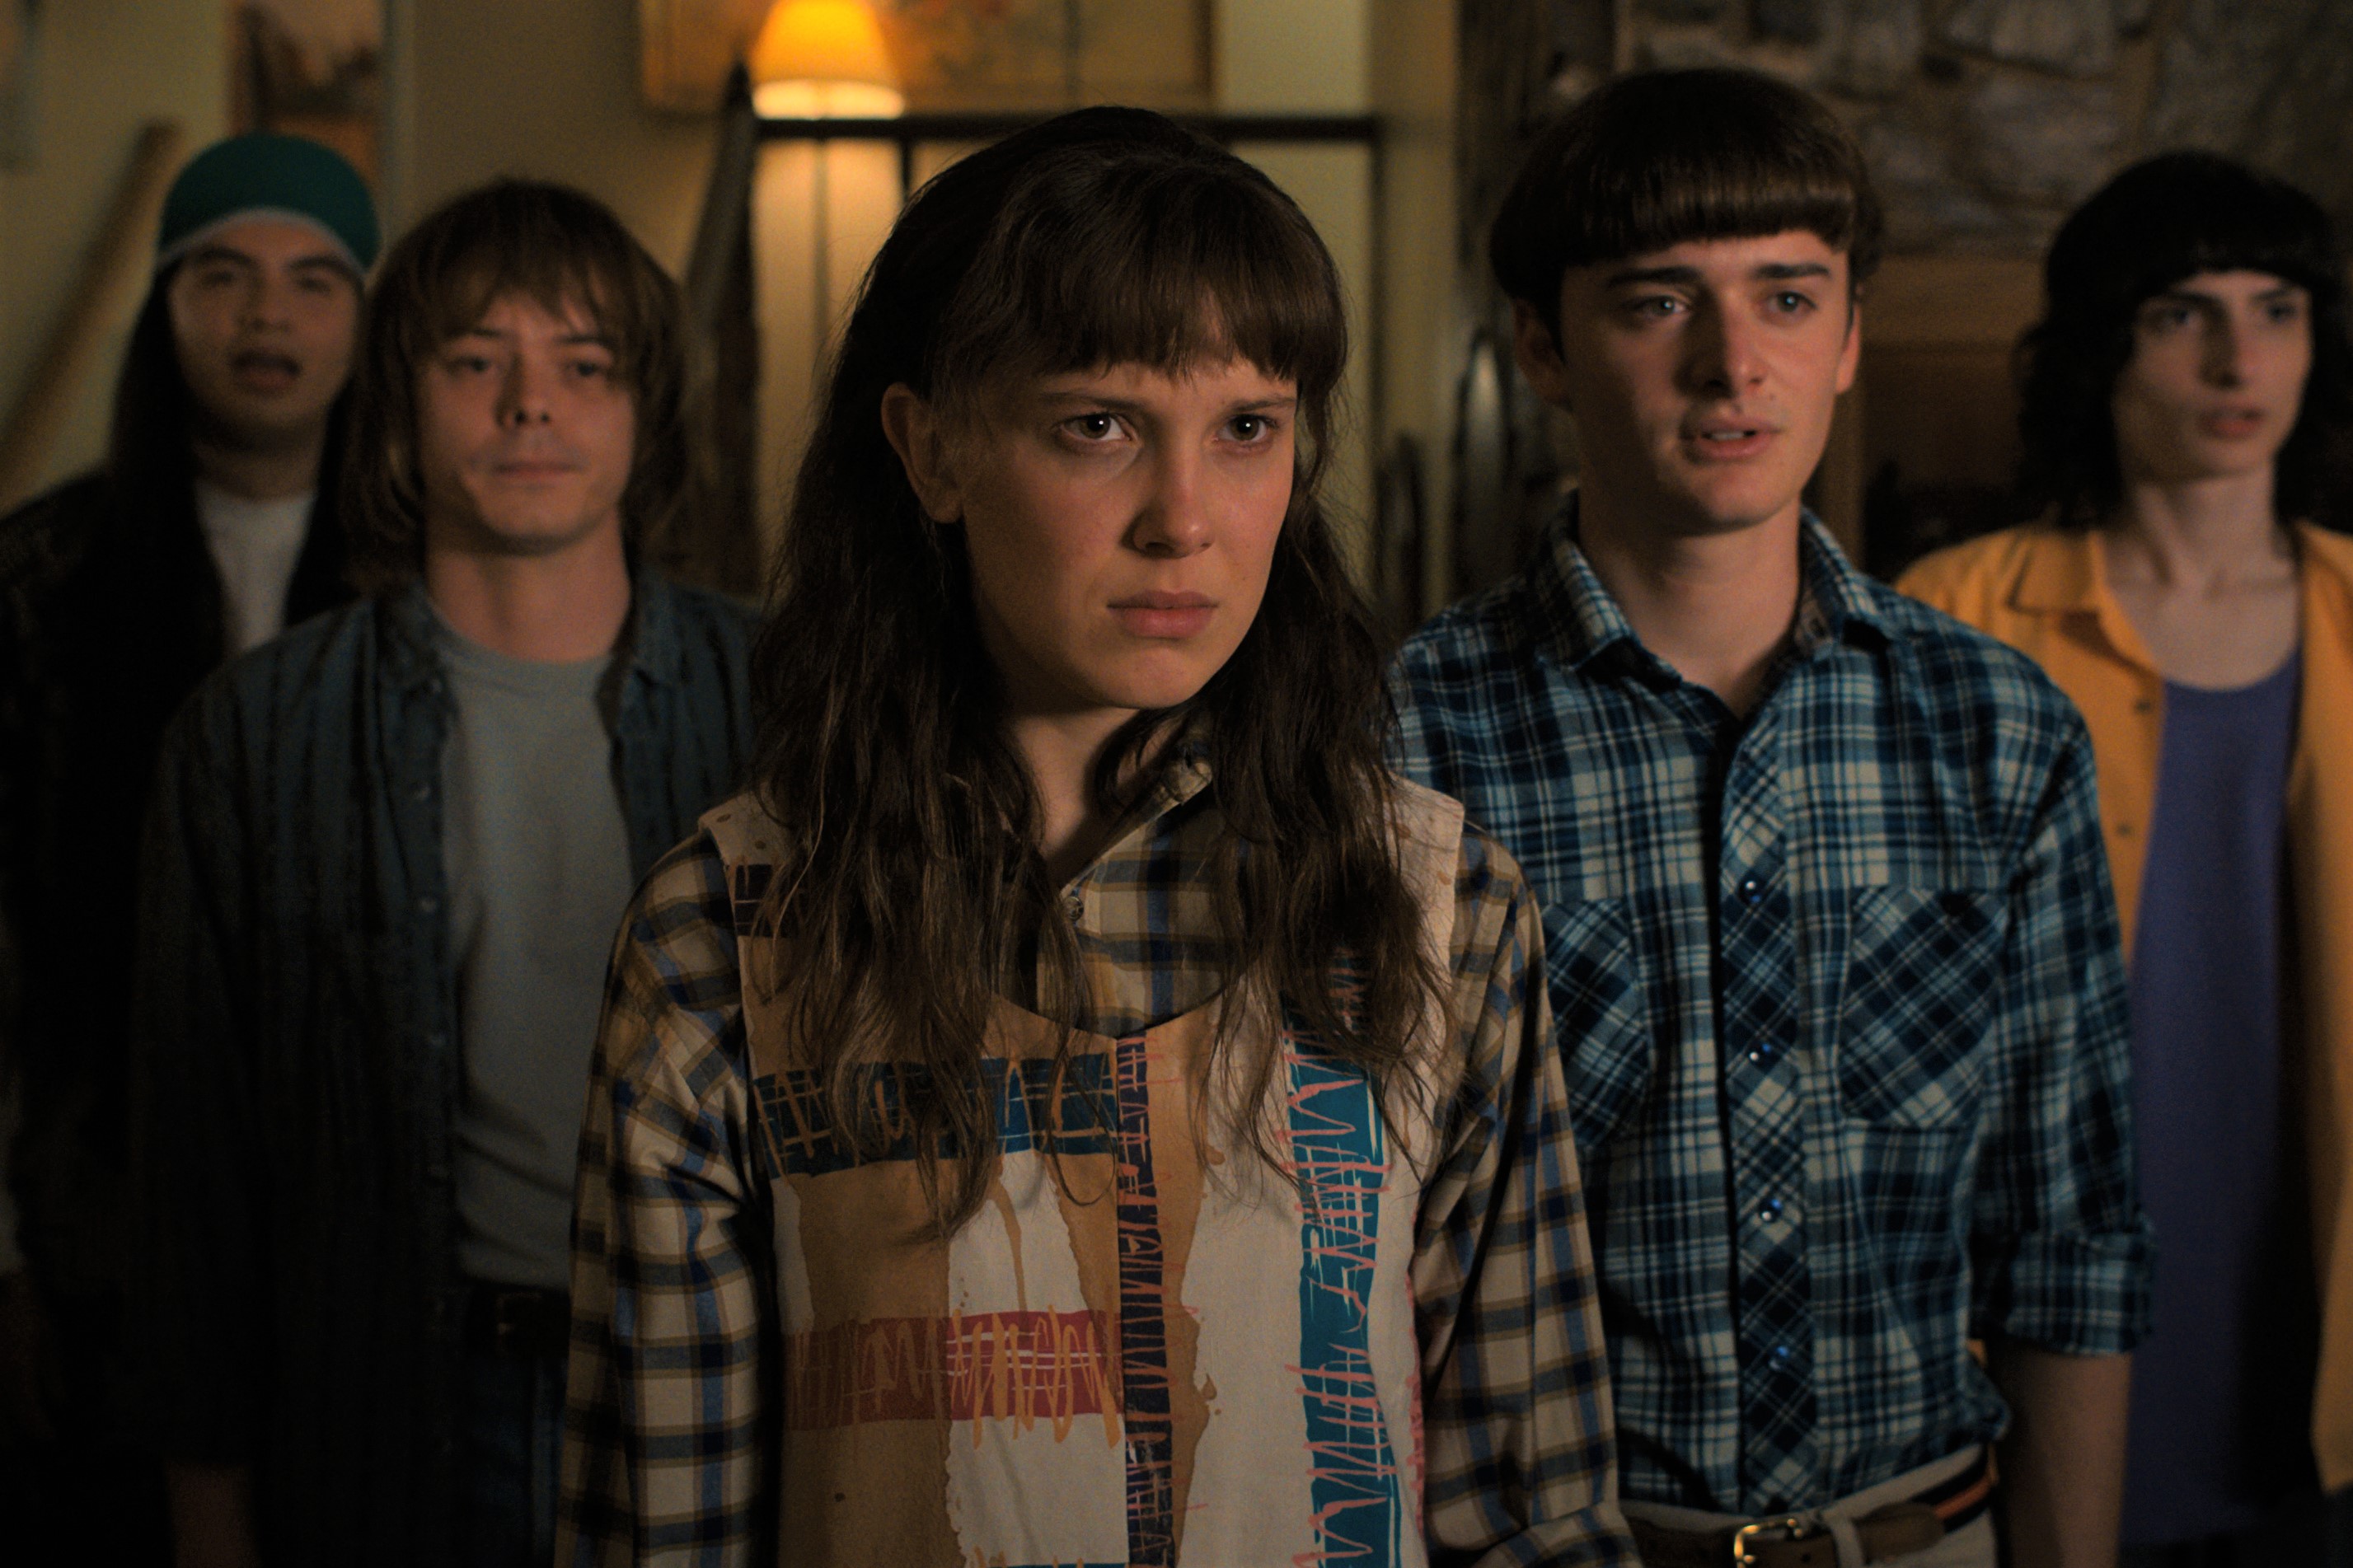 The 'Stranger Things' Season 4 Part 2 Release Date And New Trailer